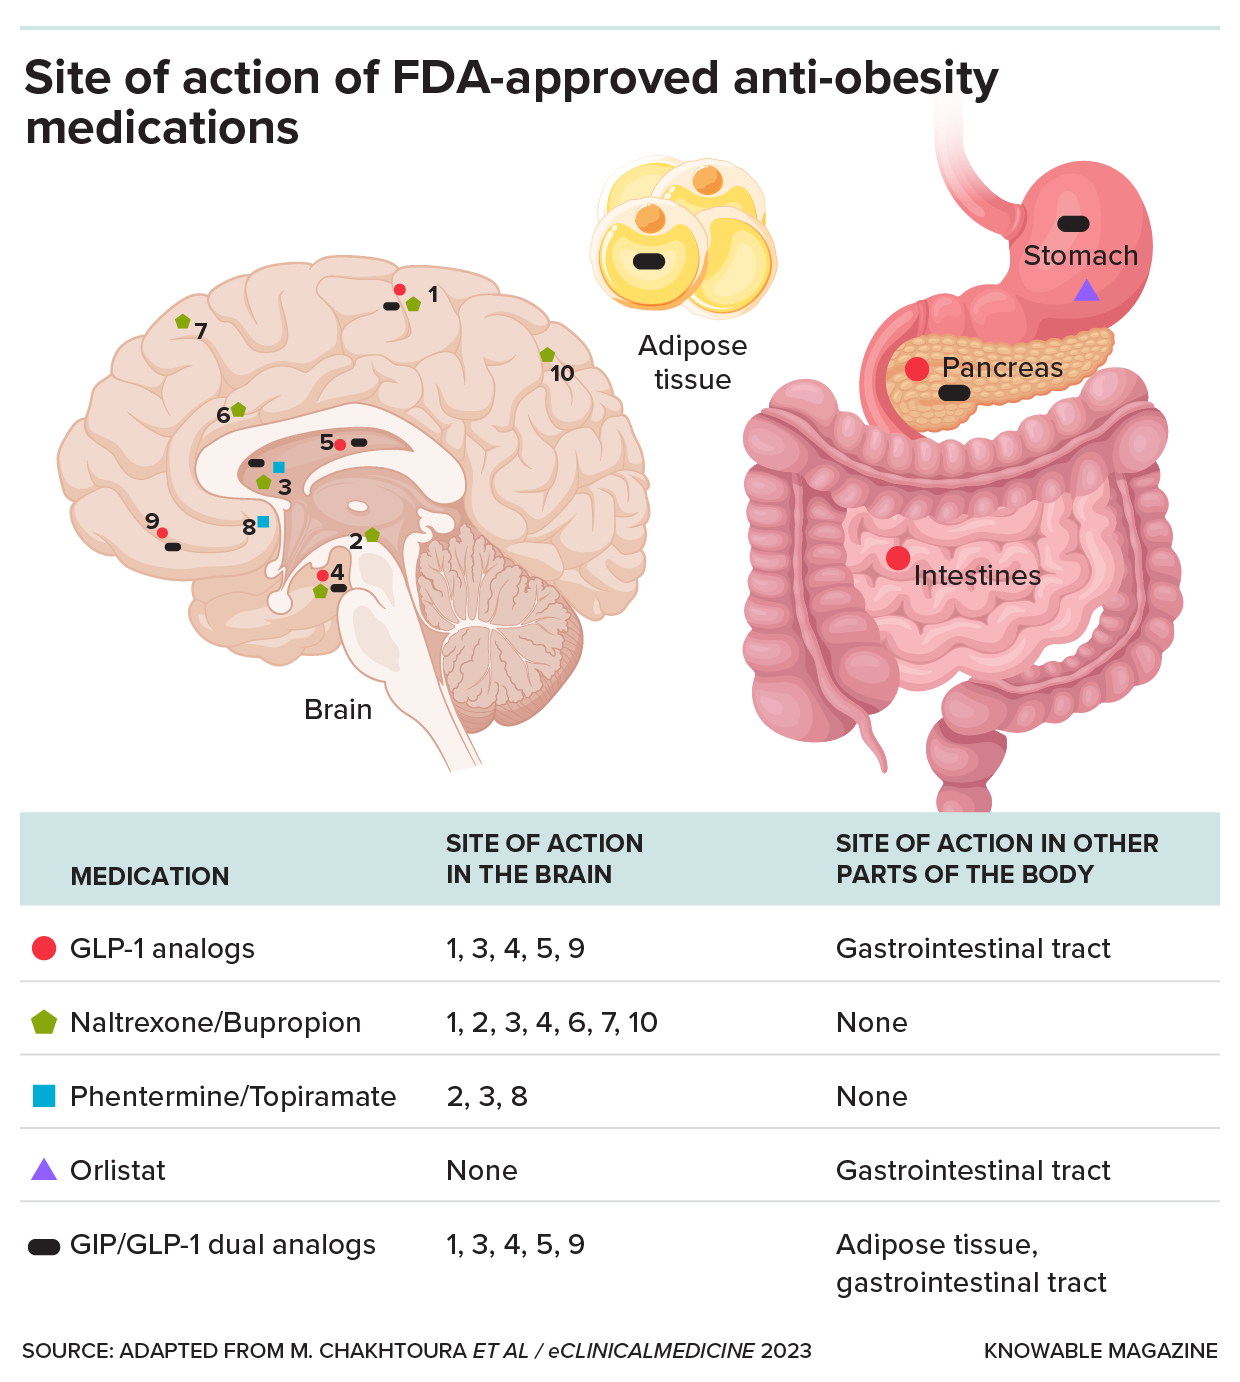 Illustration depicting the site of action of FDA-approved anti-obesity medications in the human brain and other parts of the body, labeled with numbers linking to a key below.